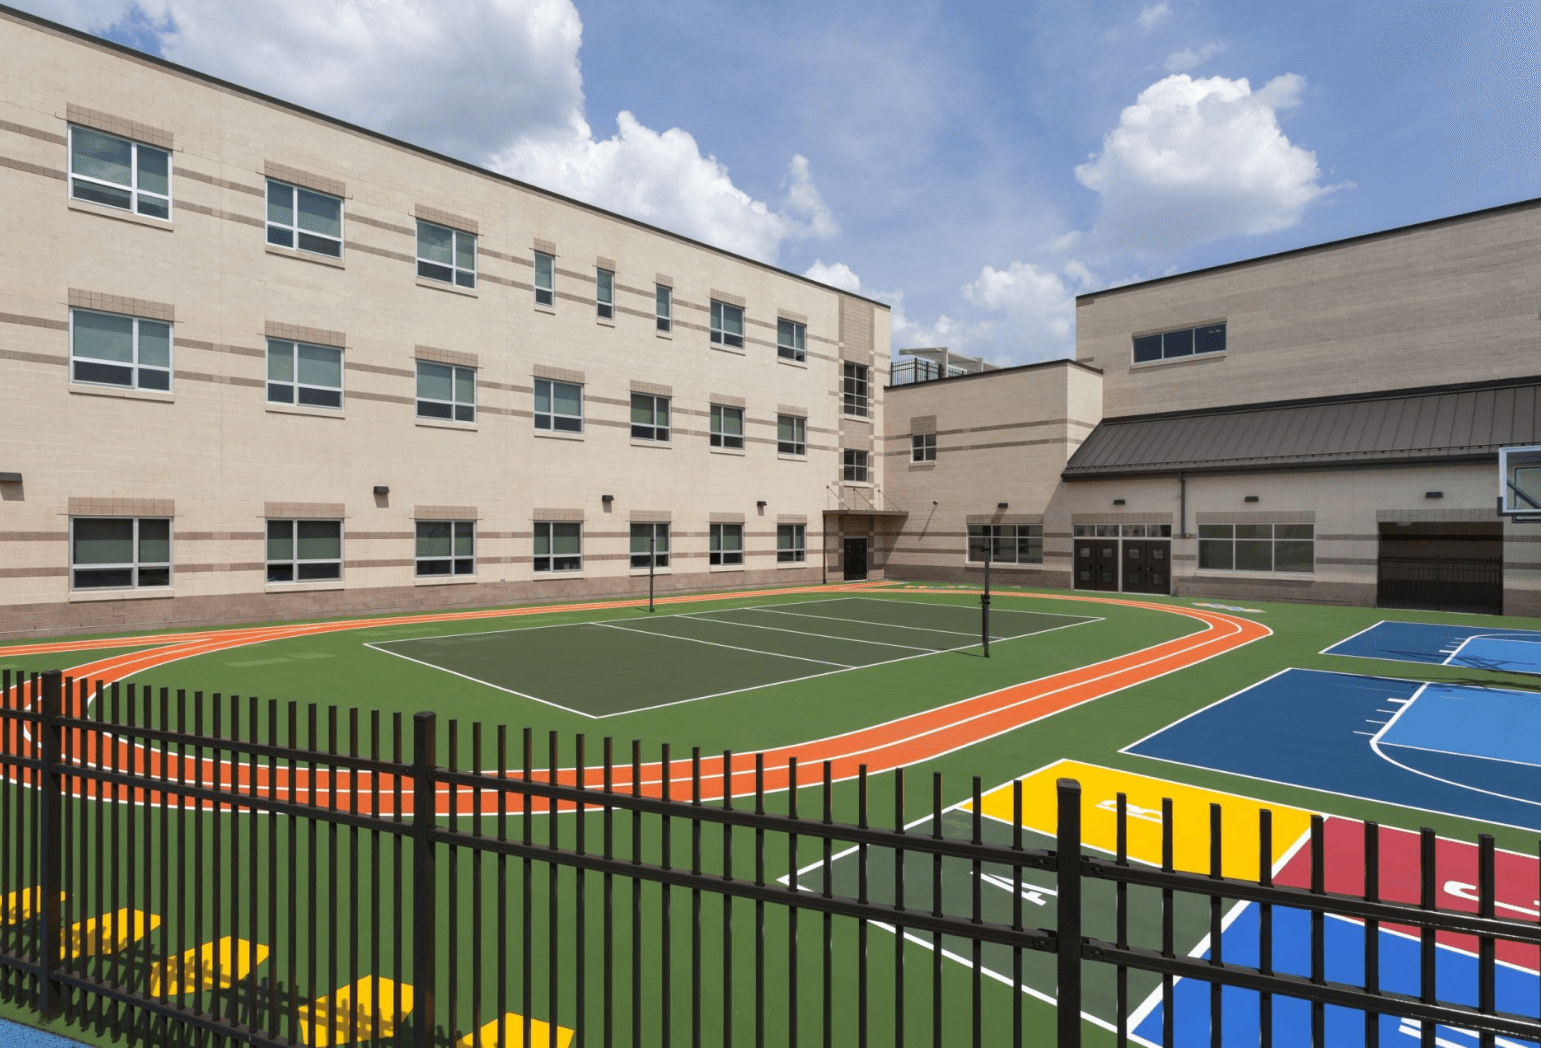 A design of an outside area for a Newark, NJ, school with a track, basketball court, and other grounds for games.